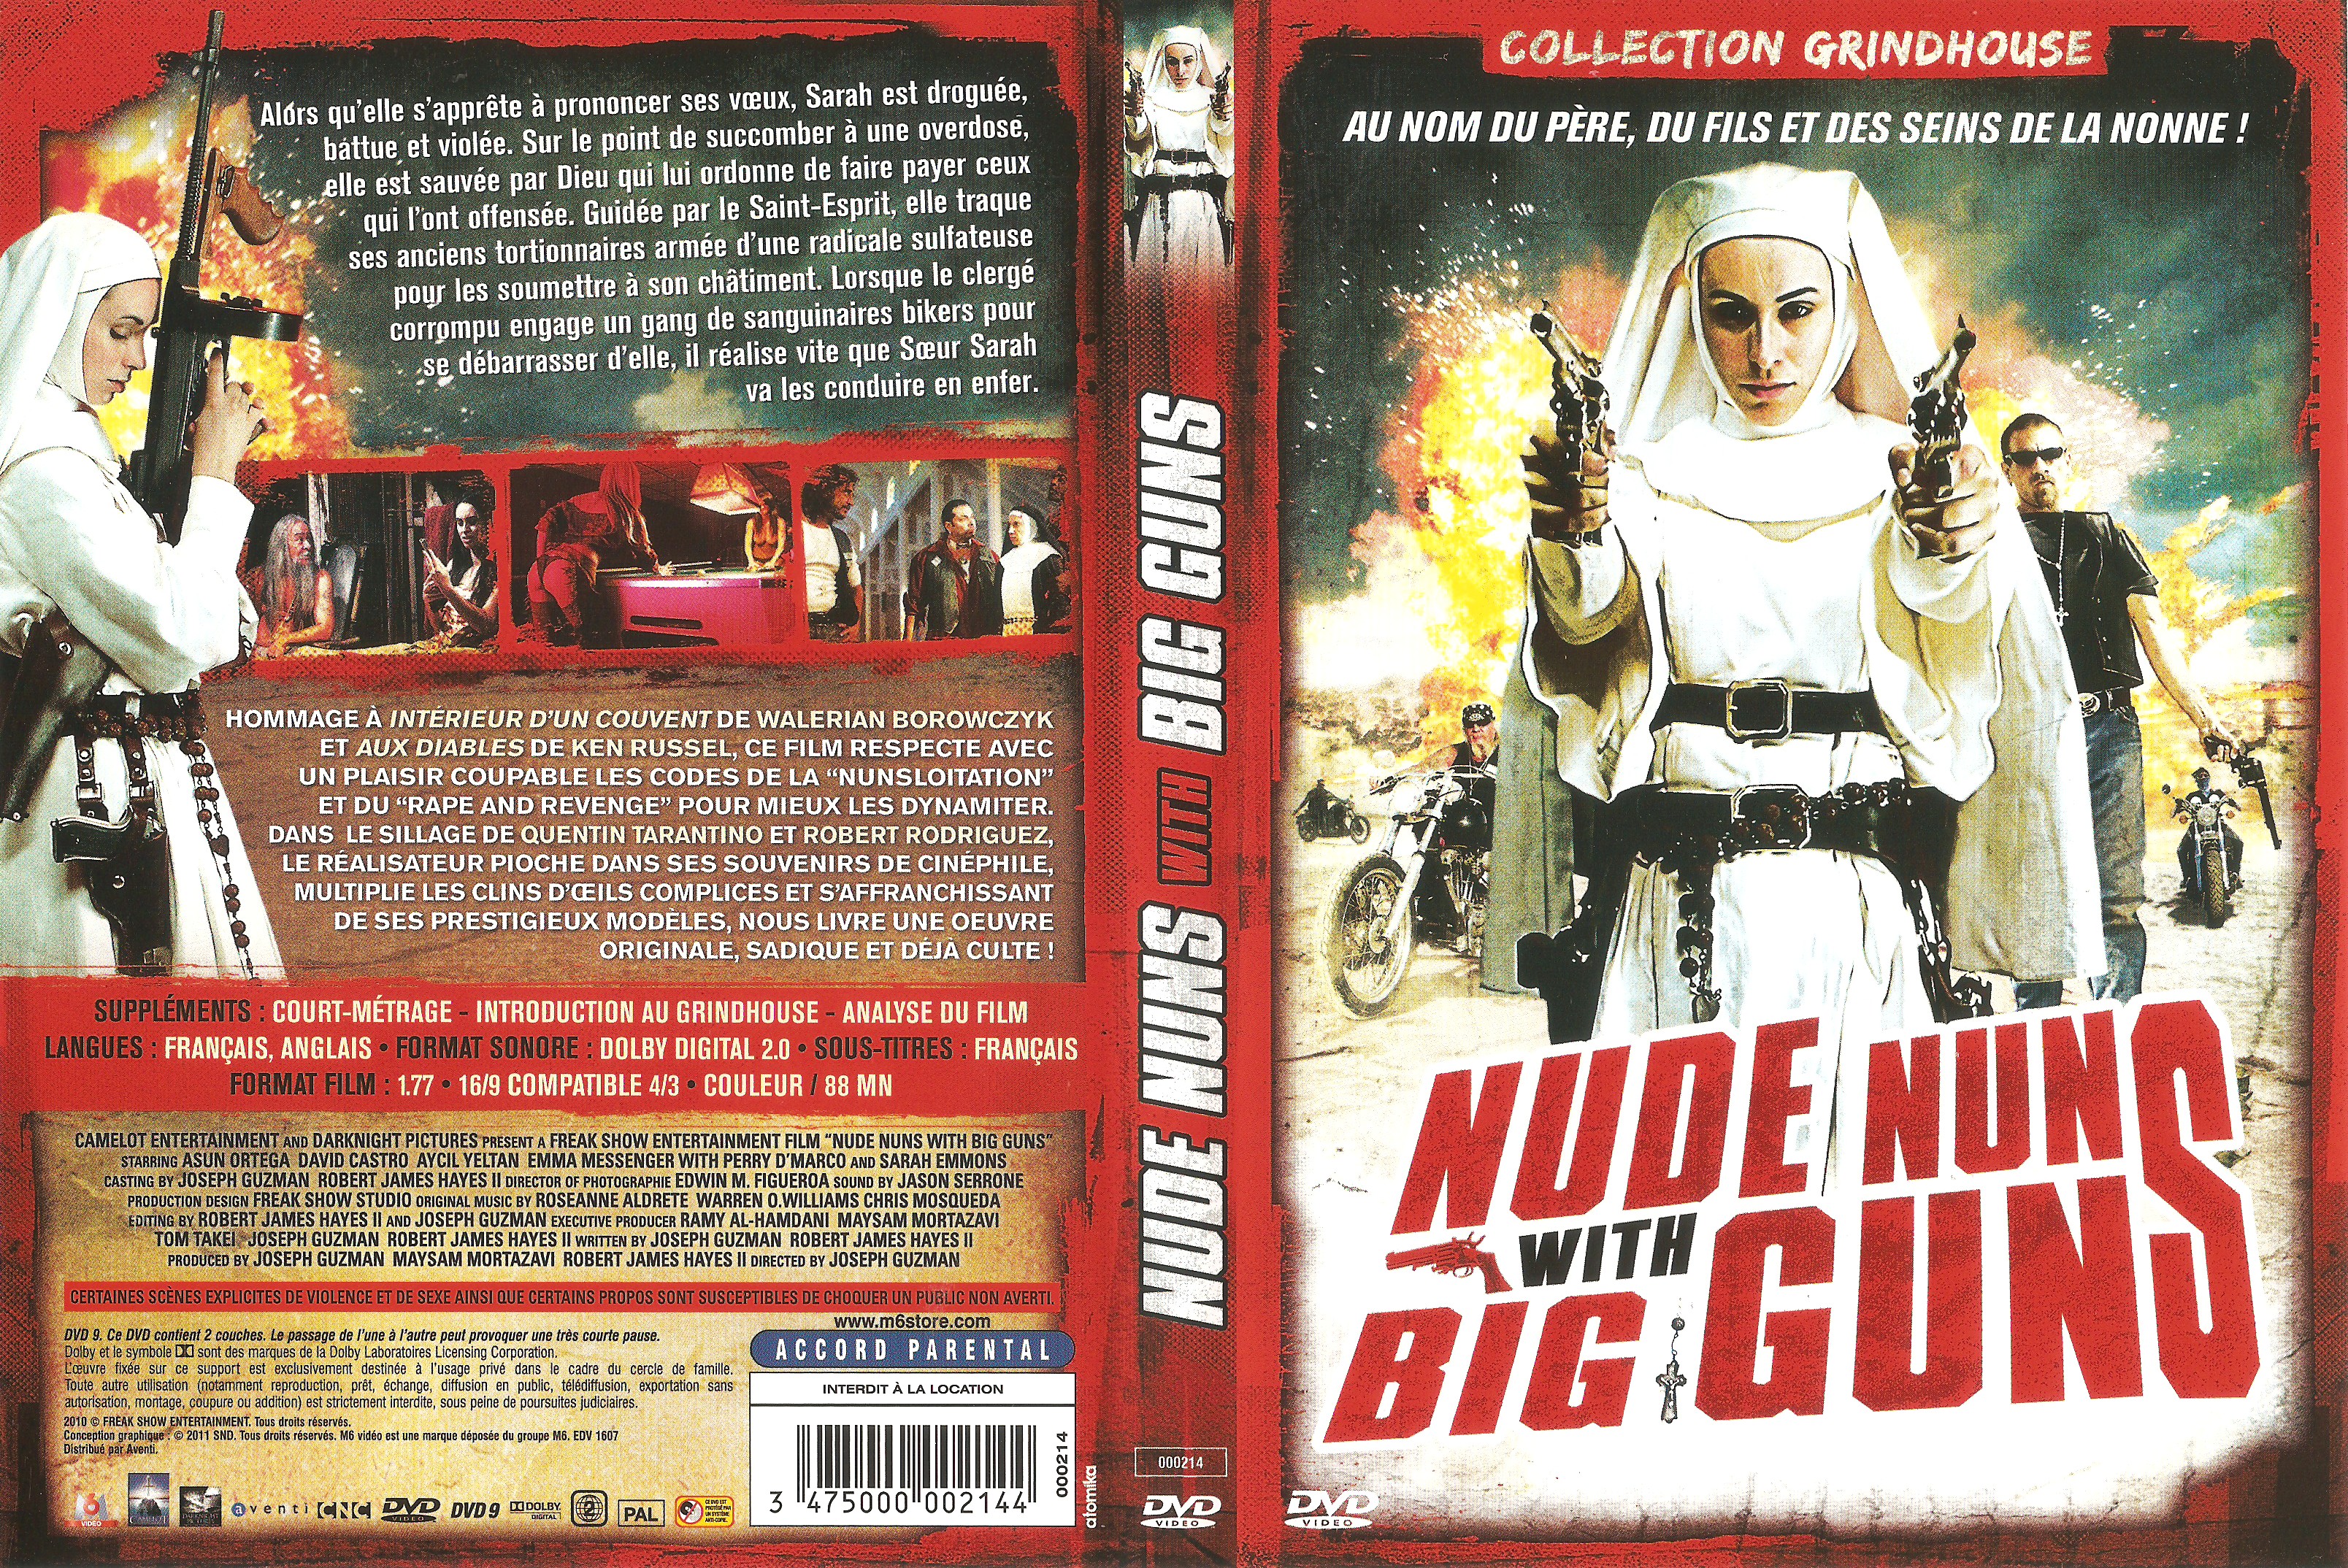 Jaquette DVD Nude Nuns With Big Guns